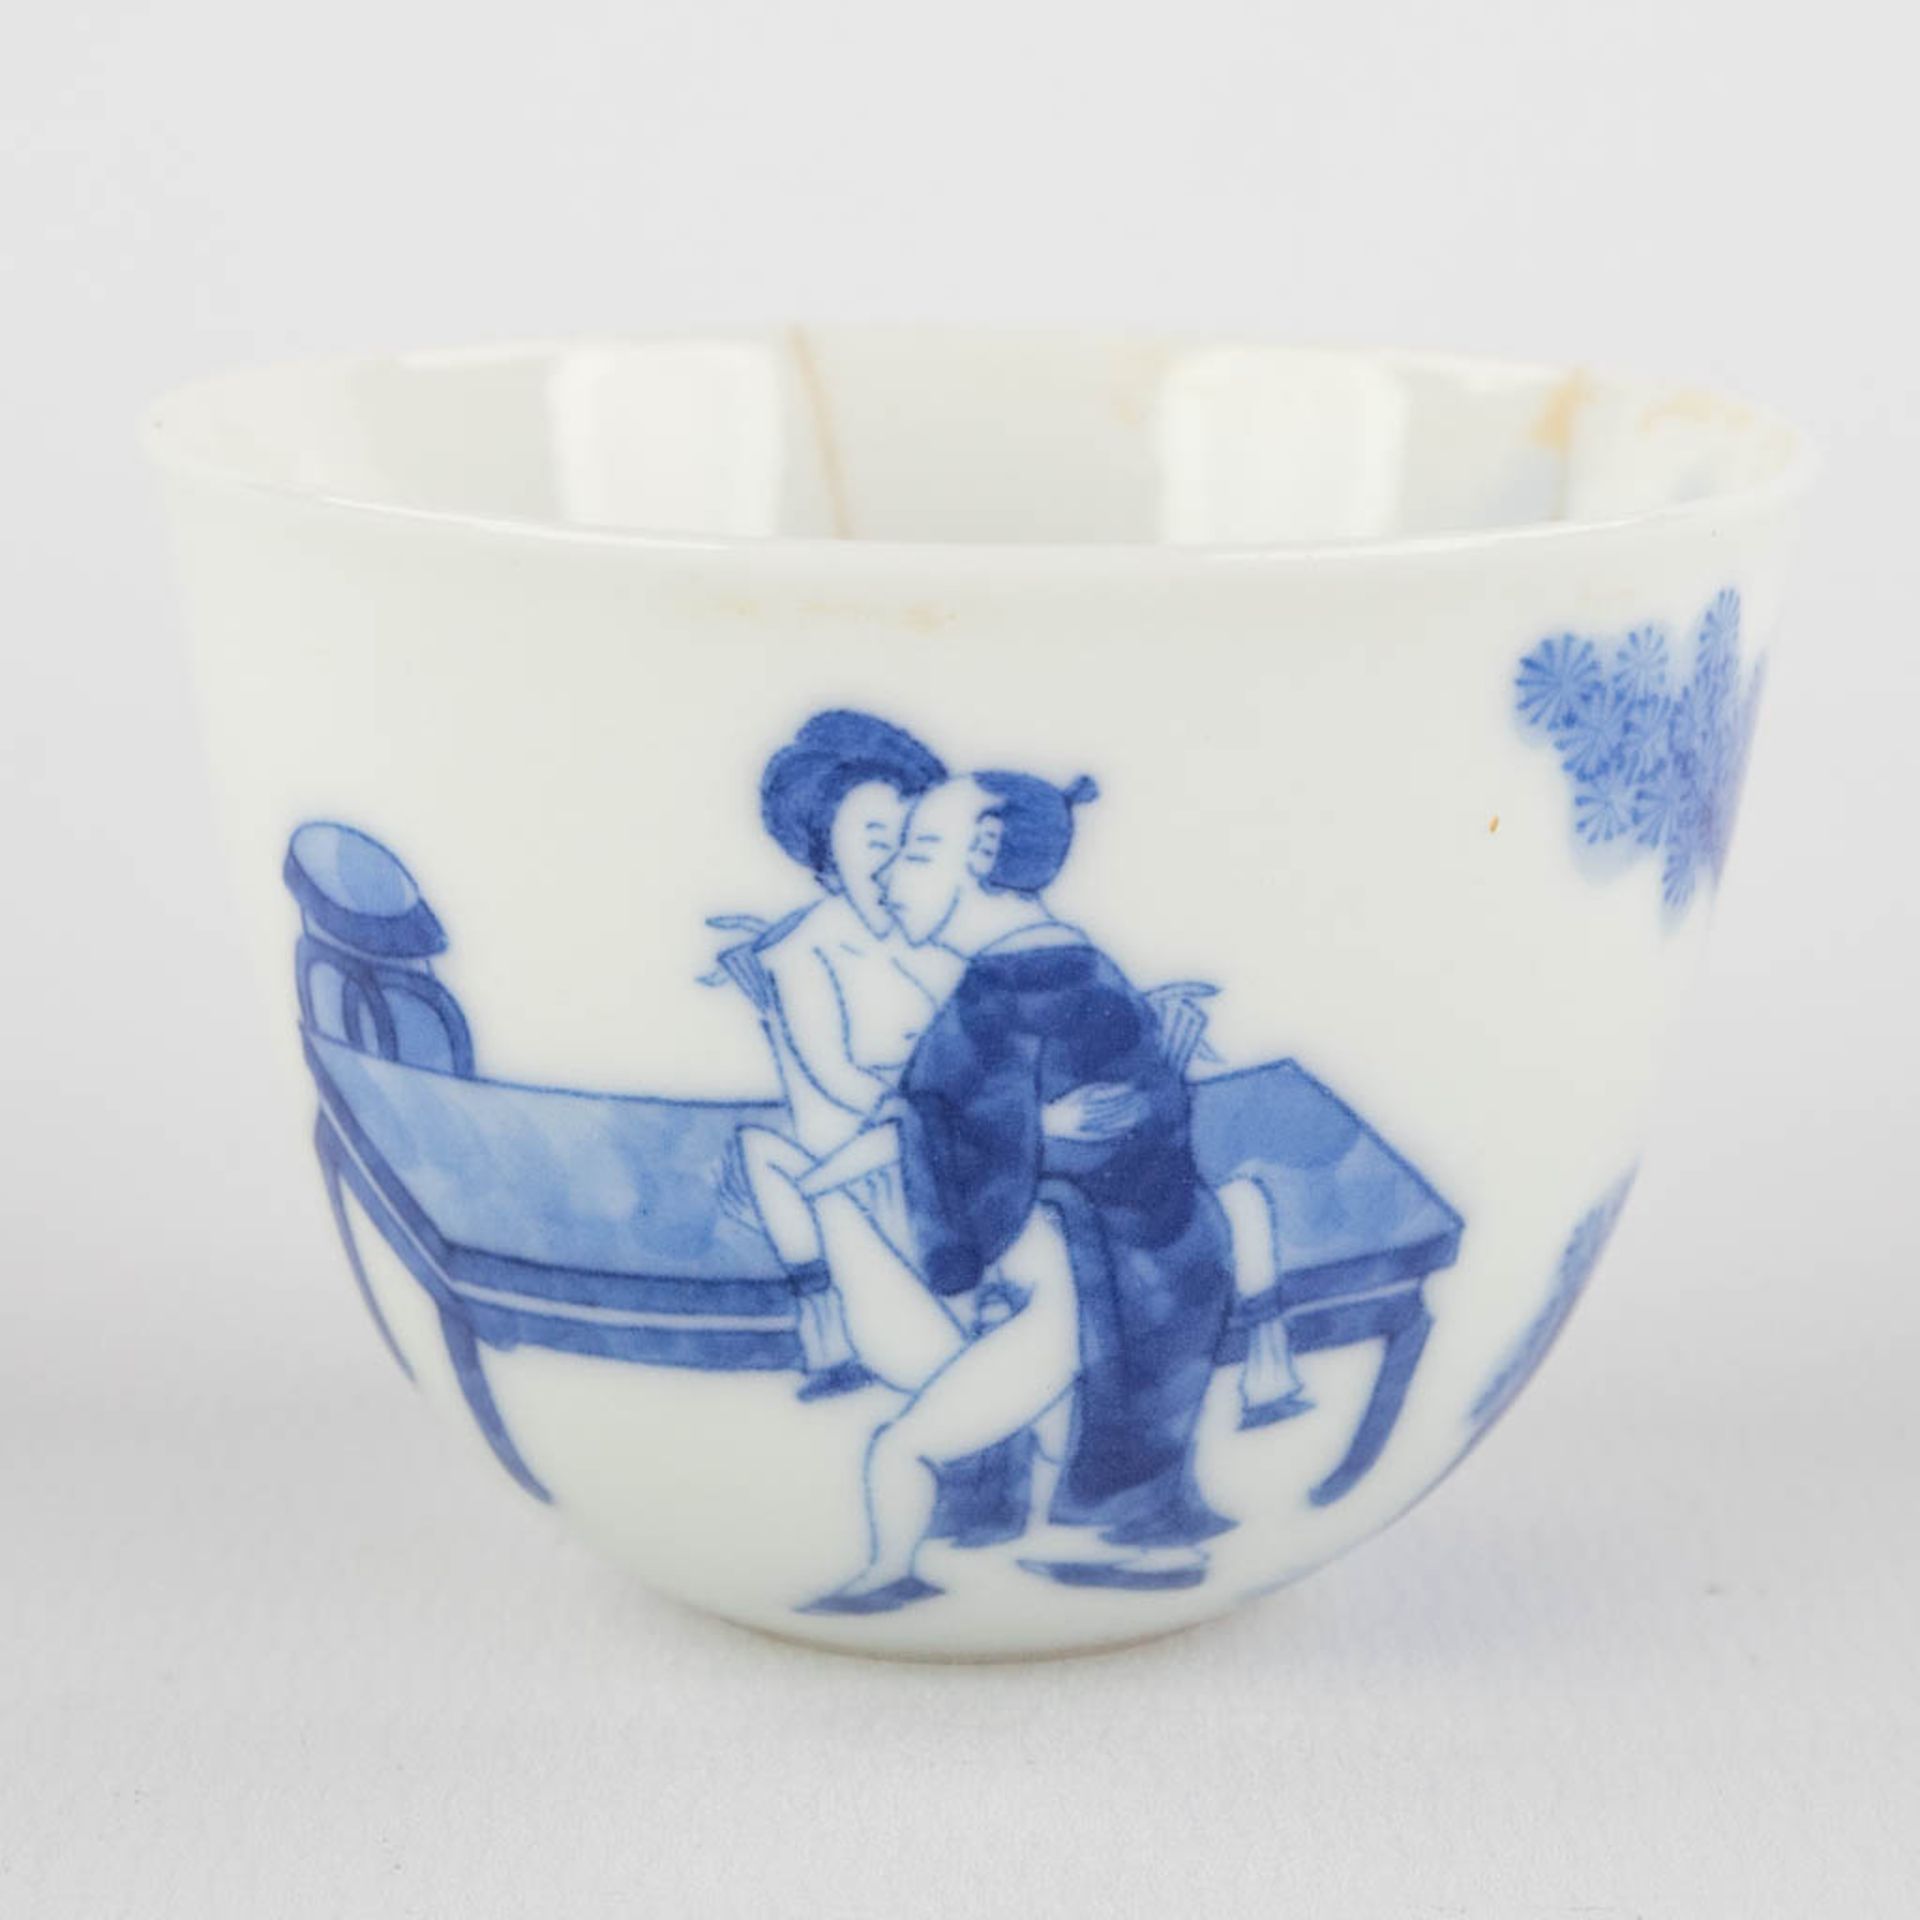 A small Chinese teacup with blue-white erotic scène, Chenghua mark, 19th/20th C. (H:4,5 x D:6,2 cm)